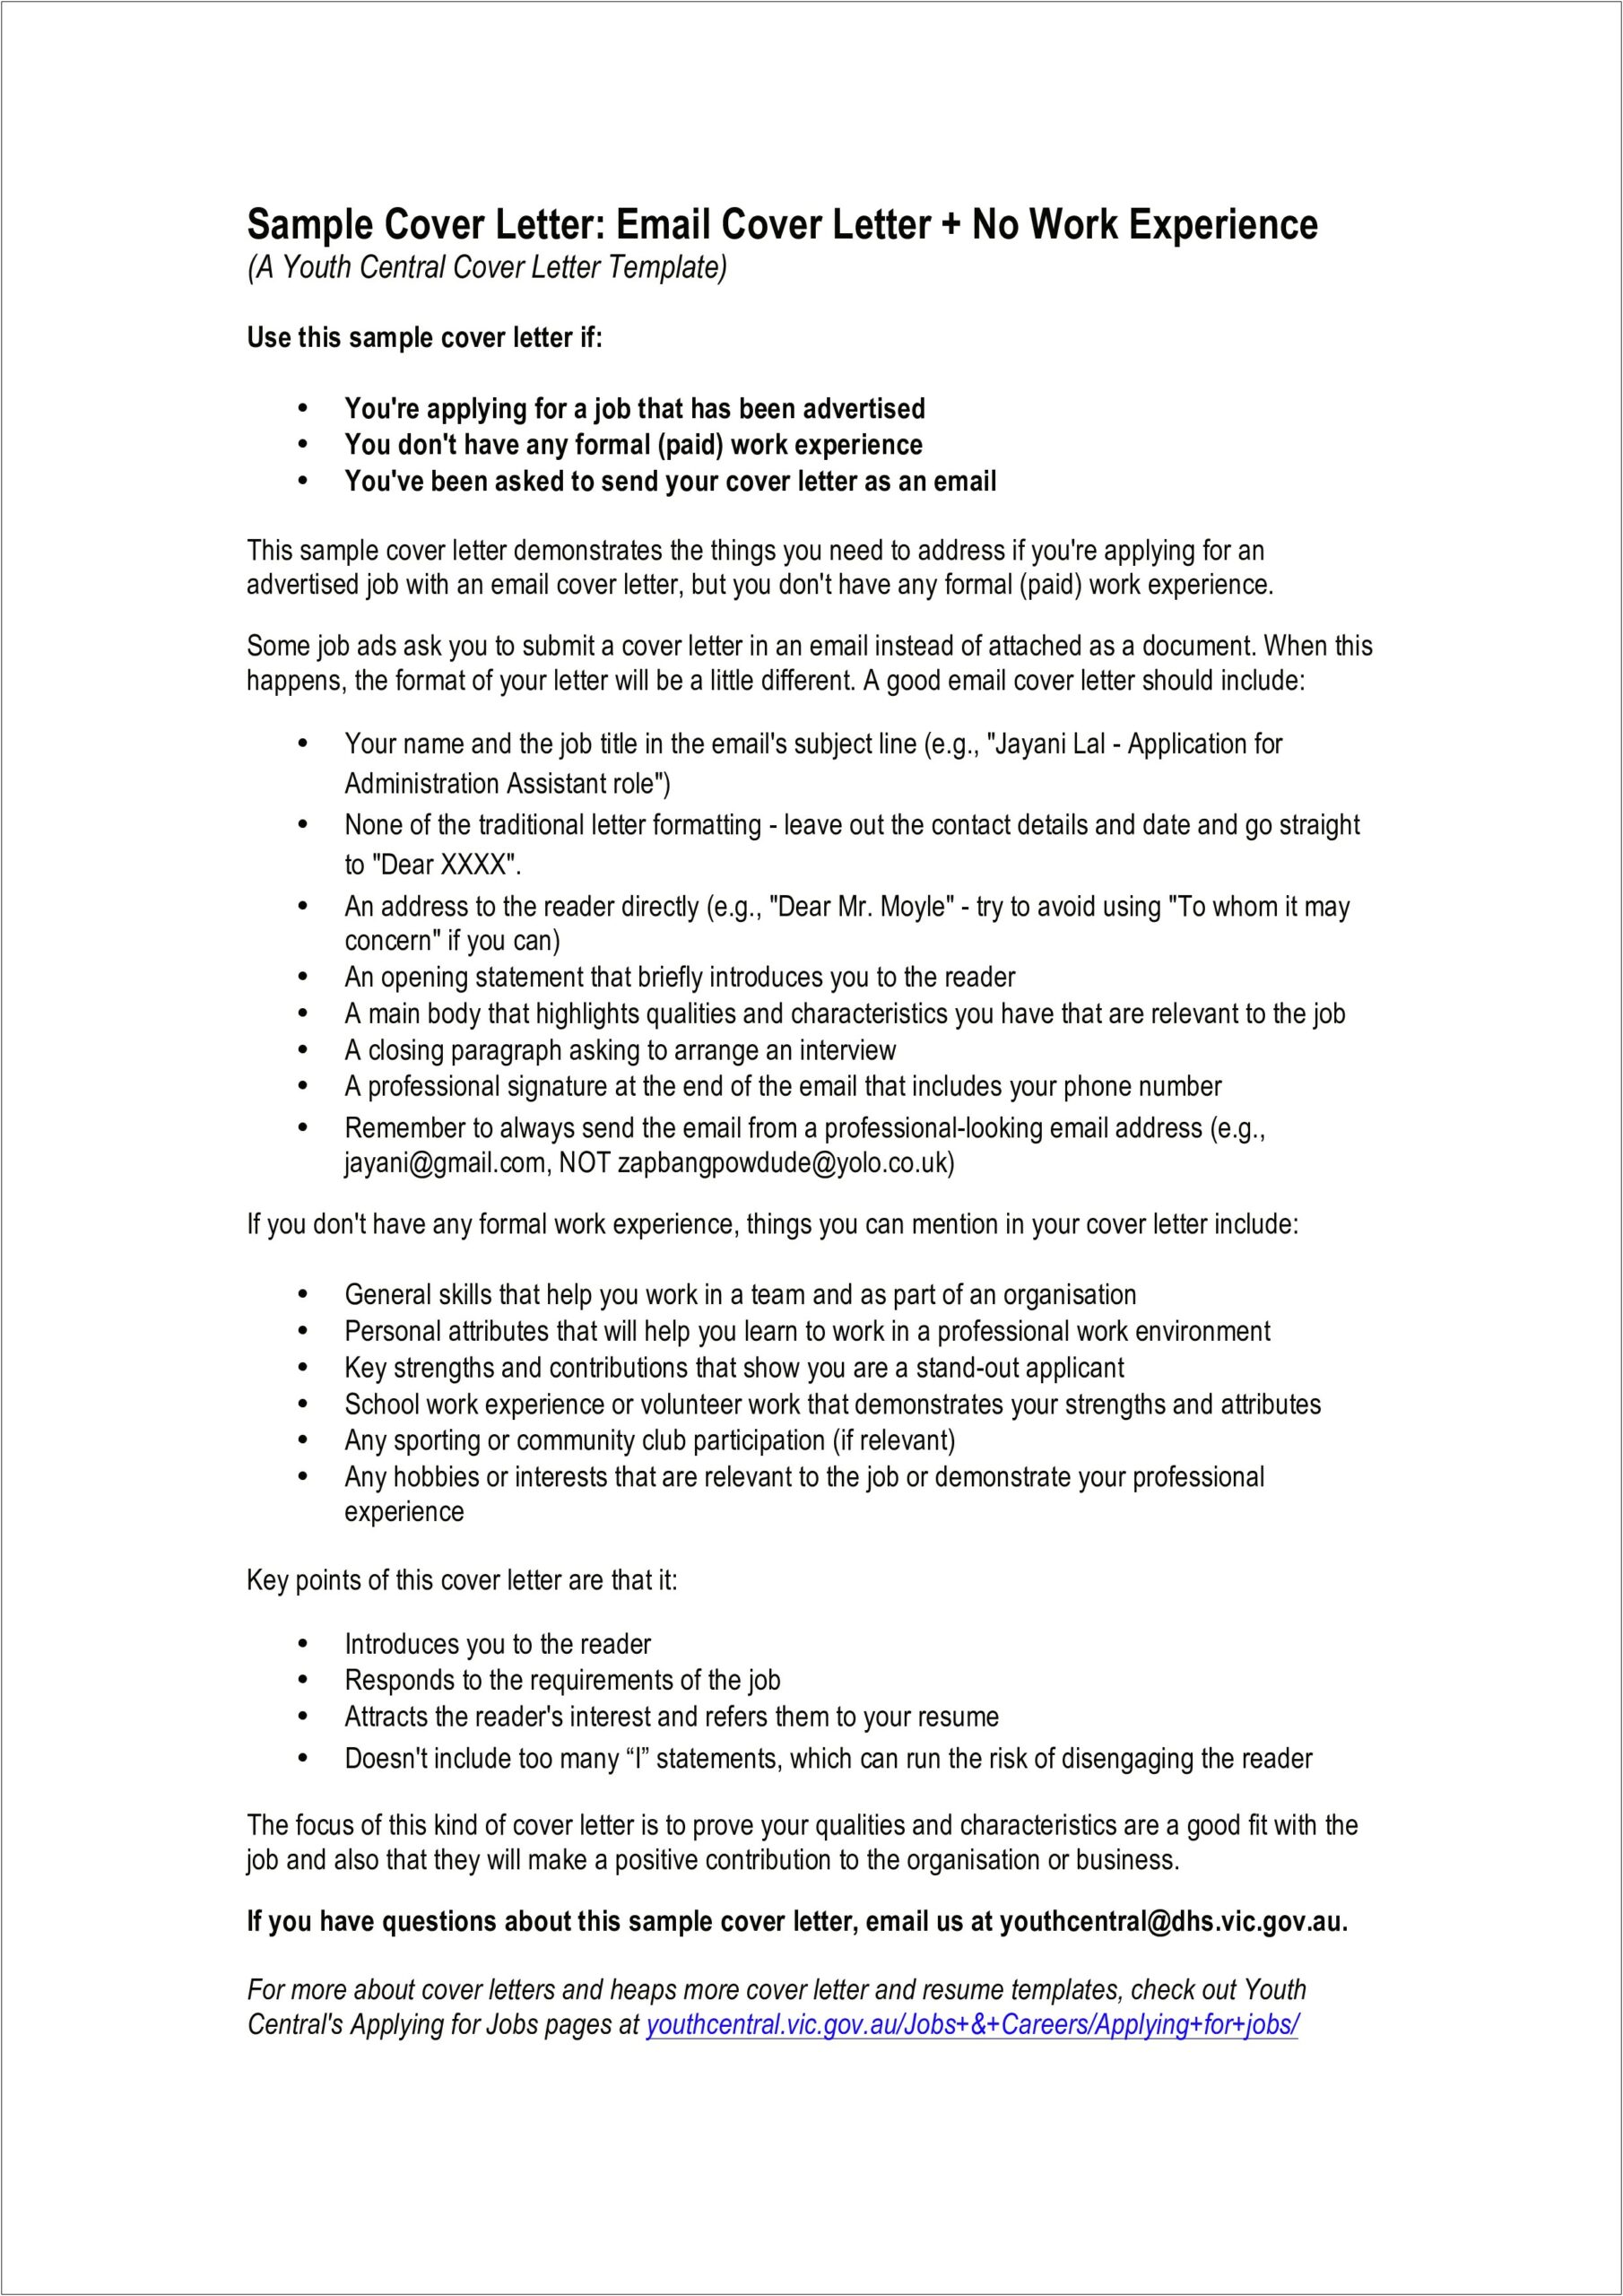 Emailing Cover Letter And Resume Examples